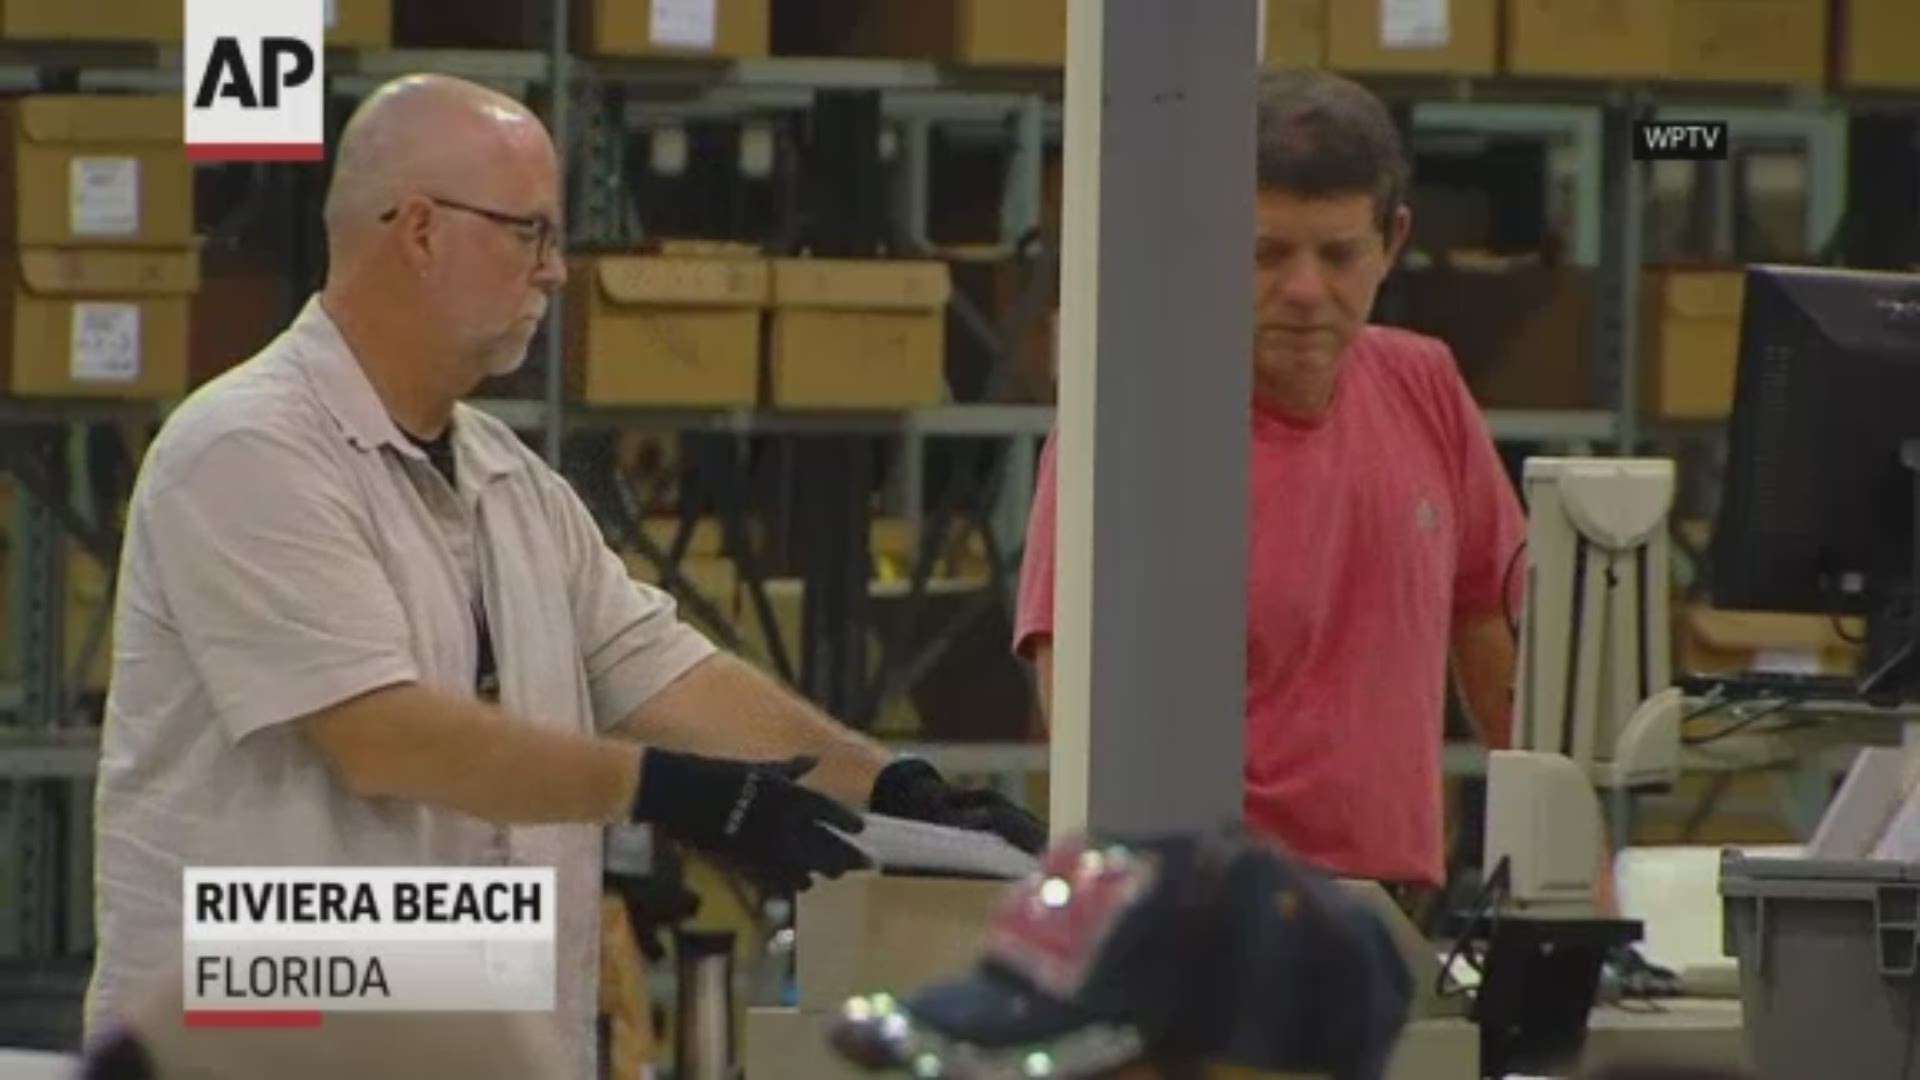 The Palm Beach County supervisor of elections Susan Bucher said she doesn't believe her department will be able to meet the state's Thursday deadline to complete the recount, throwing into question what would happen to votes there. (AP)